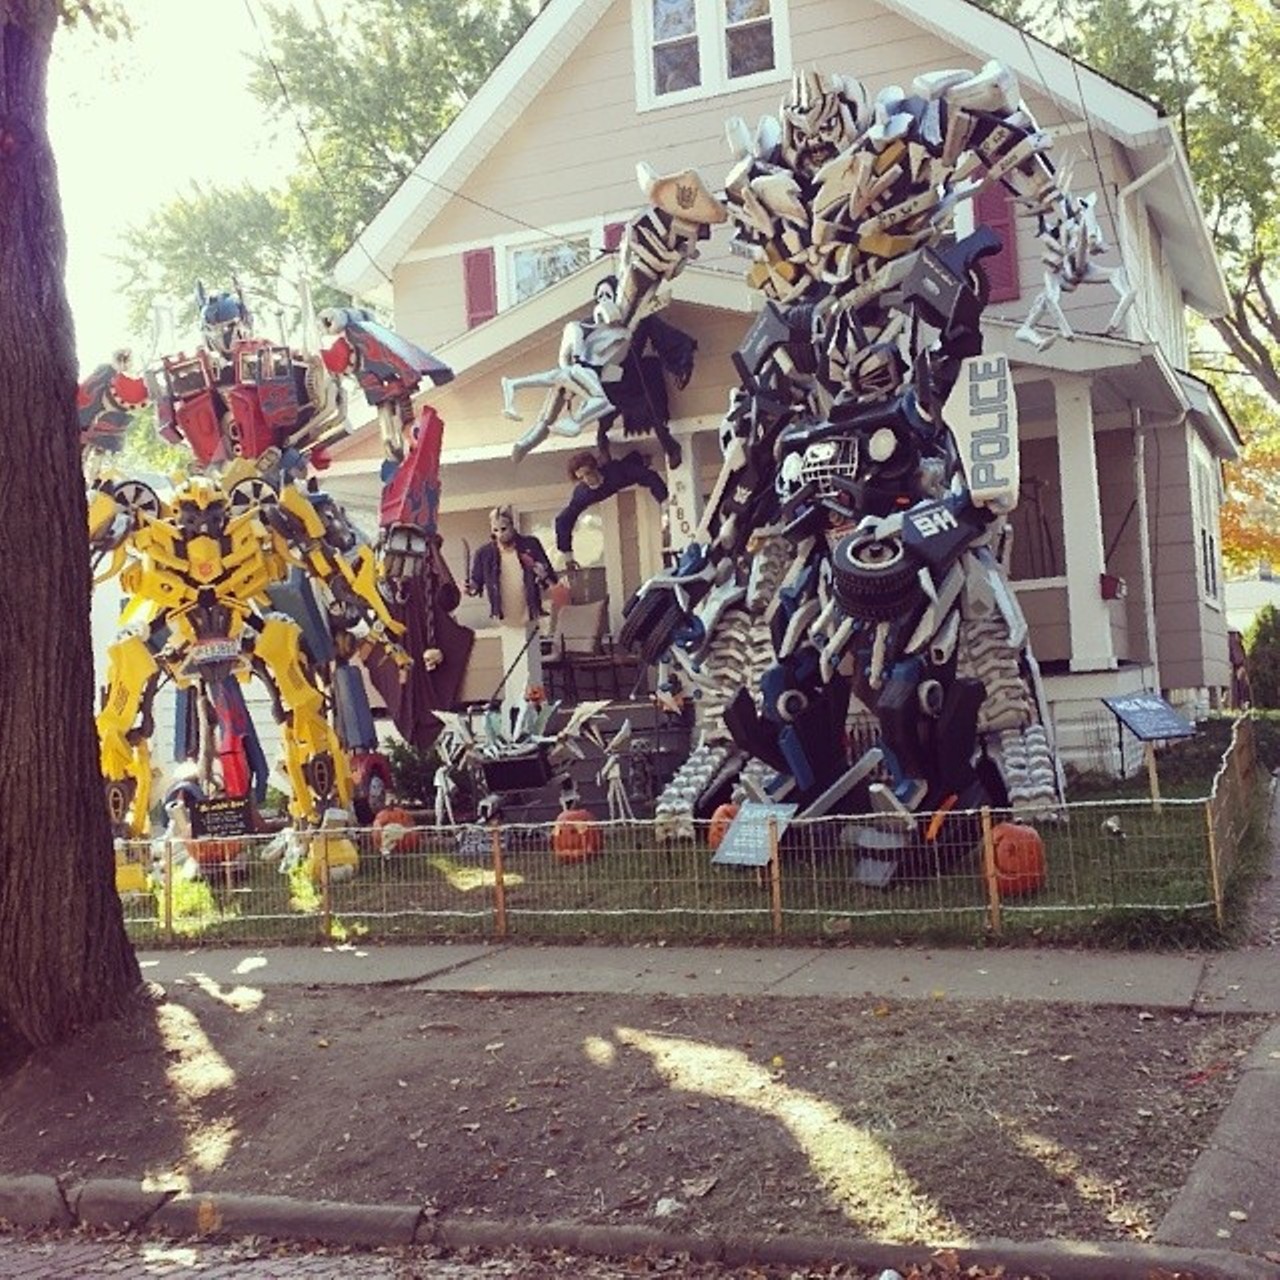 #onlyincleveland will you find the best Halloween decorations ever.